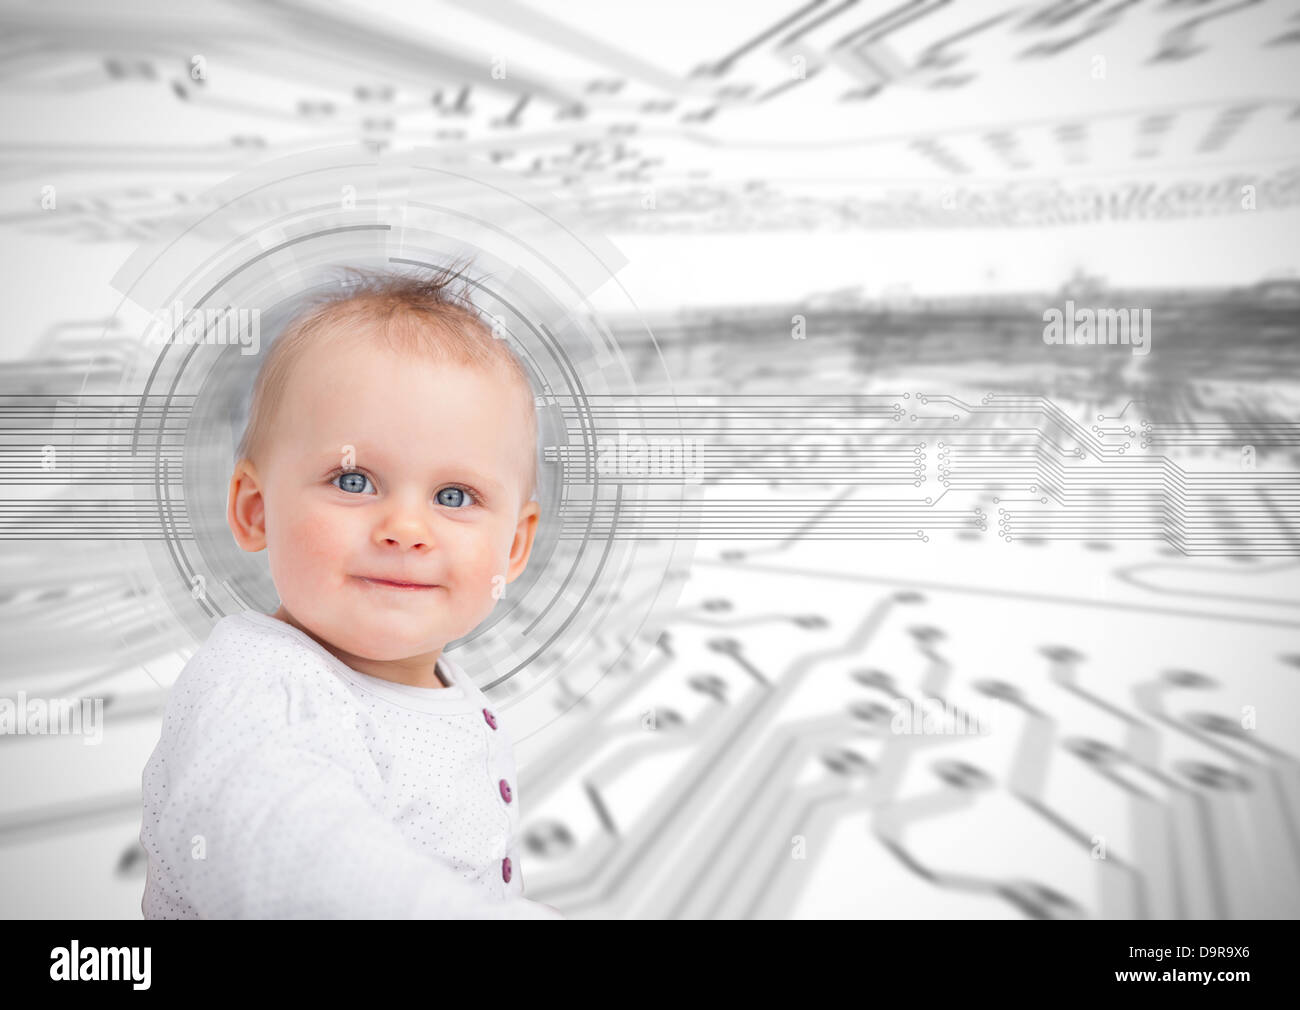 Portrait of a cute baby over futuristic interface Stock Photo